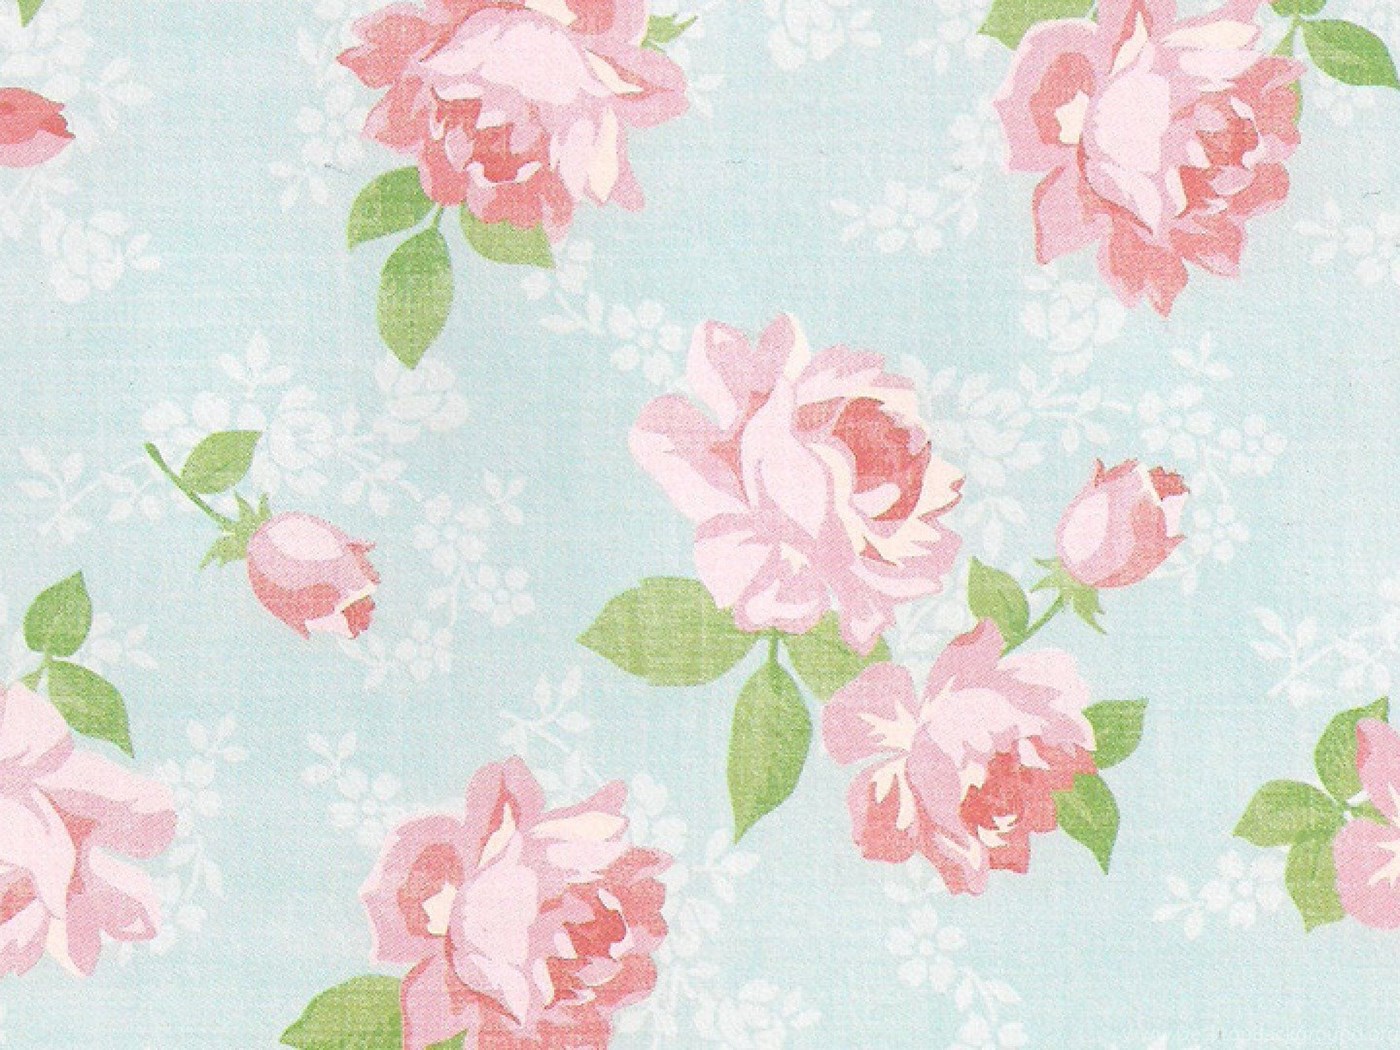 Floral Ipad Wallpapers Tumblr - Light Pink Floral Background , HD Wallpaper & Backgrounds